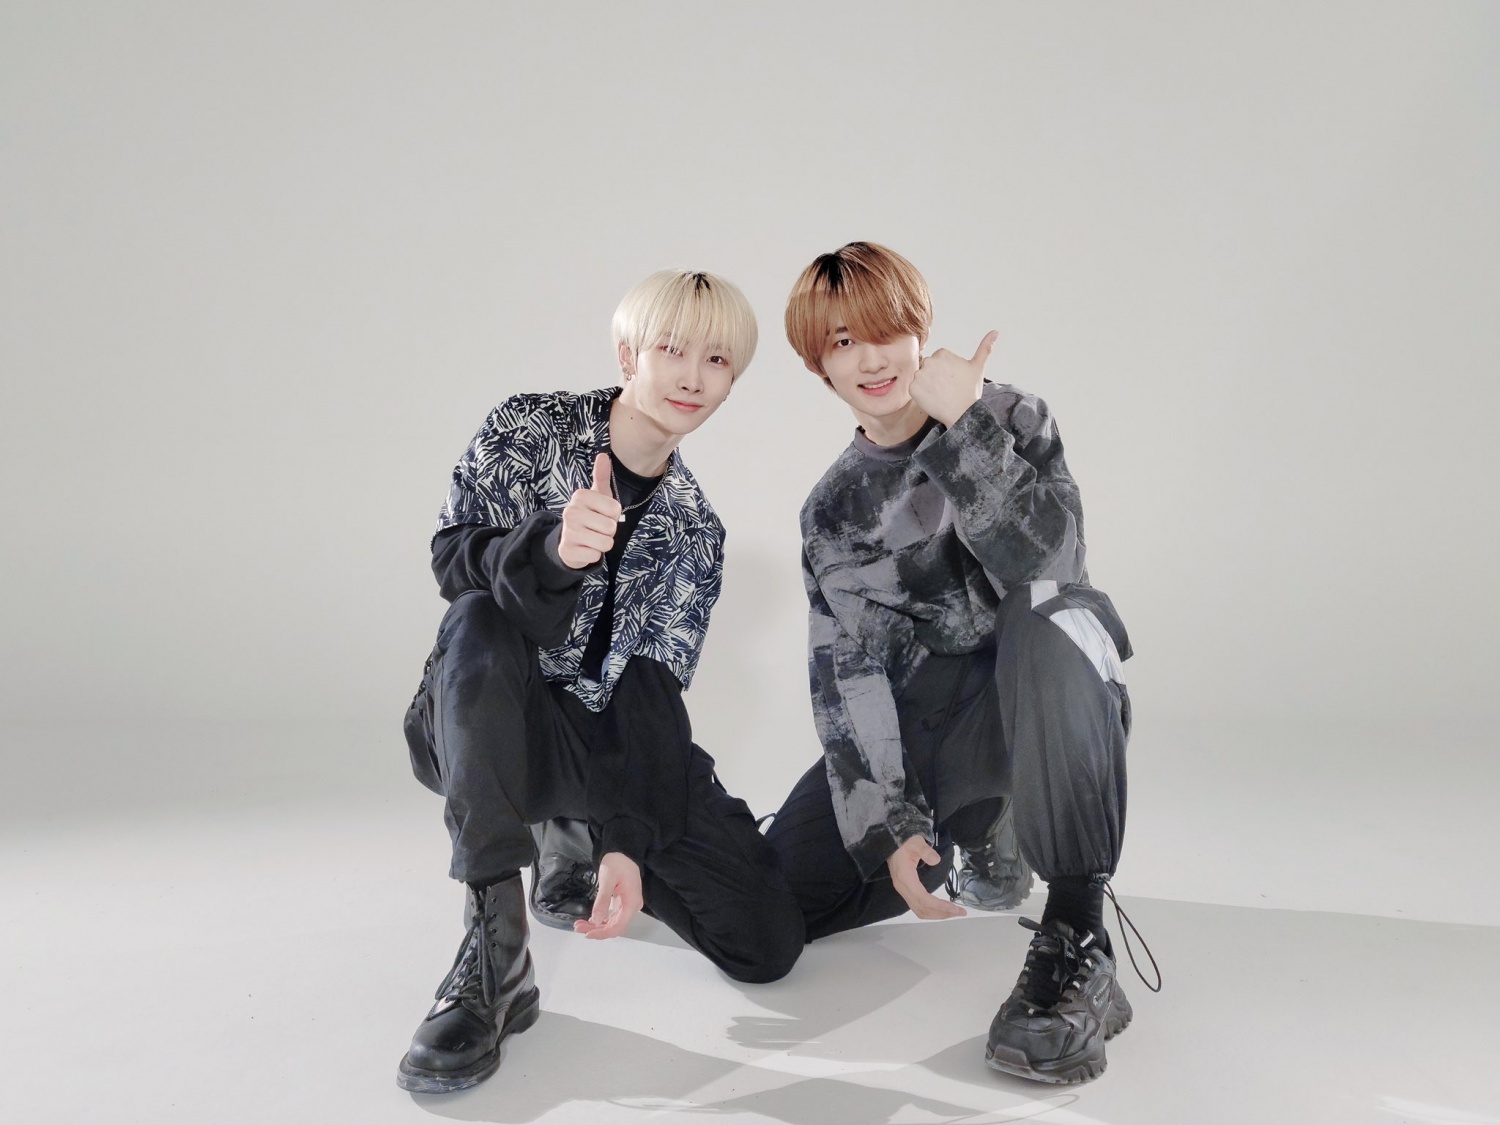 'Verivery' Hoyoung and Yongseung, 'City Girls' special choreography video released